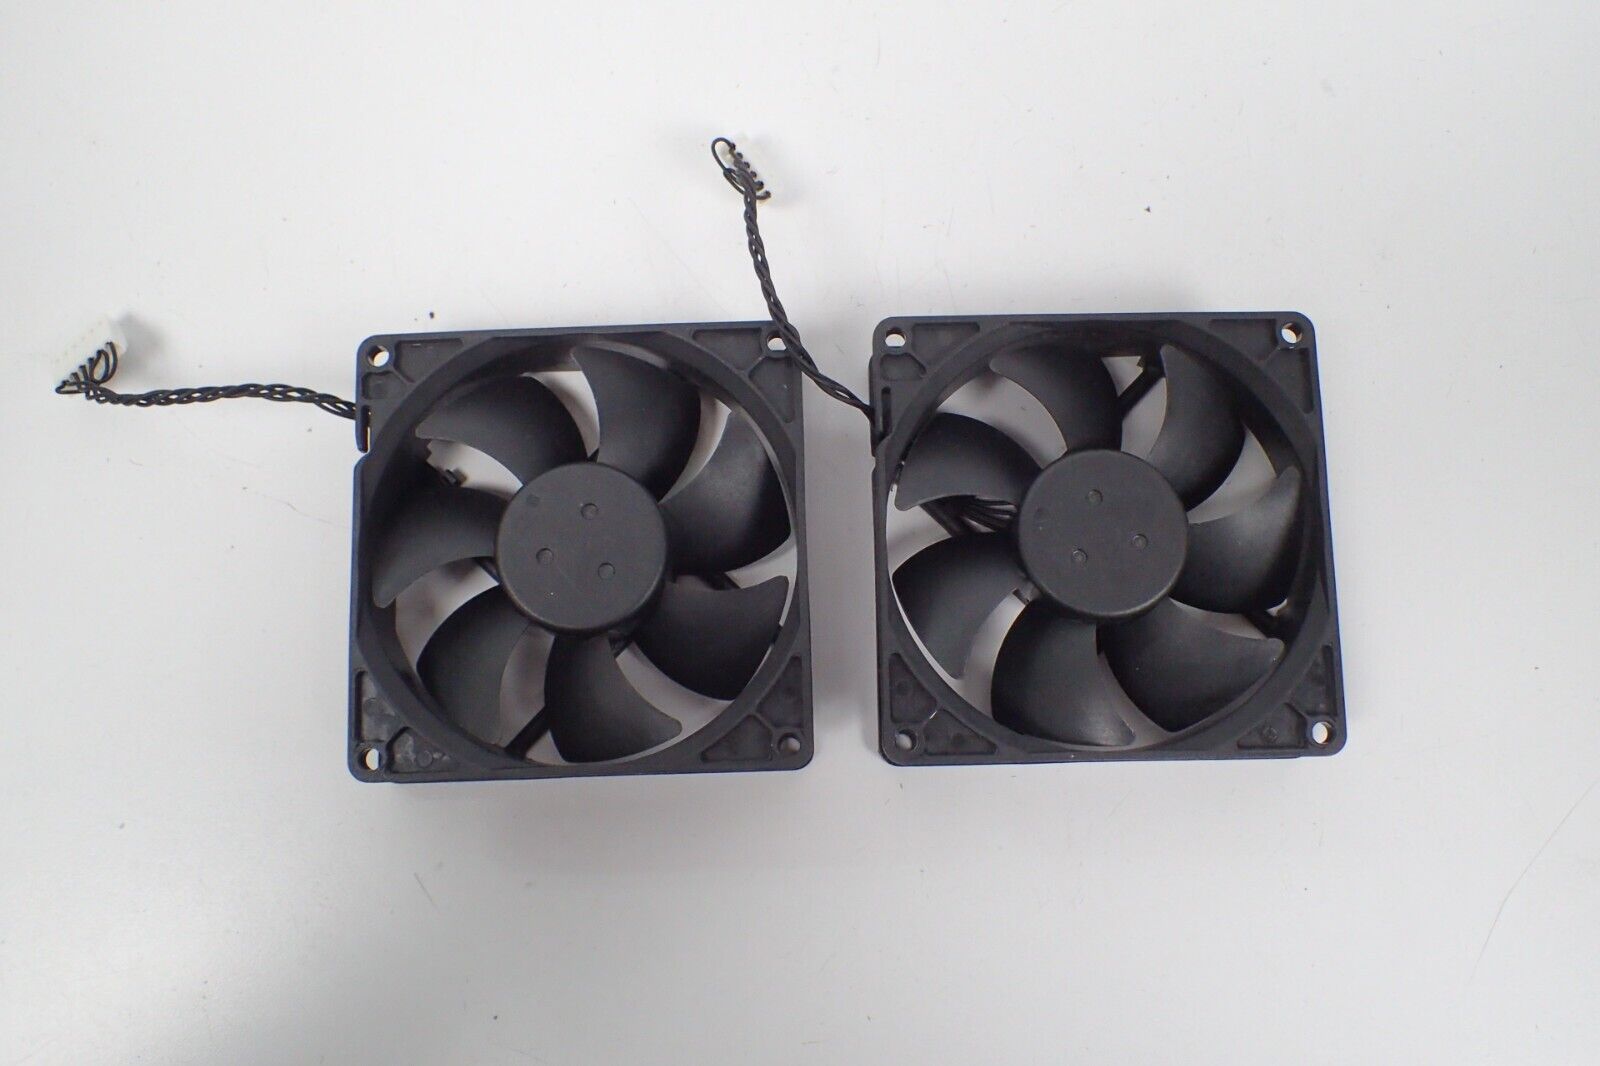 Lot of 2 HP Z440 Workstation Genuine Case Cooling Fan 6Pin 12V 0.4A PVA092G12S